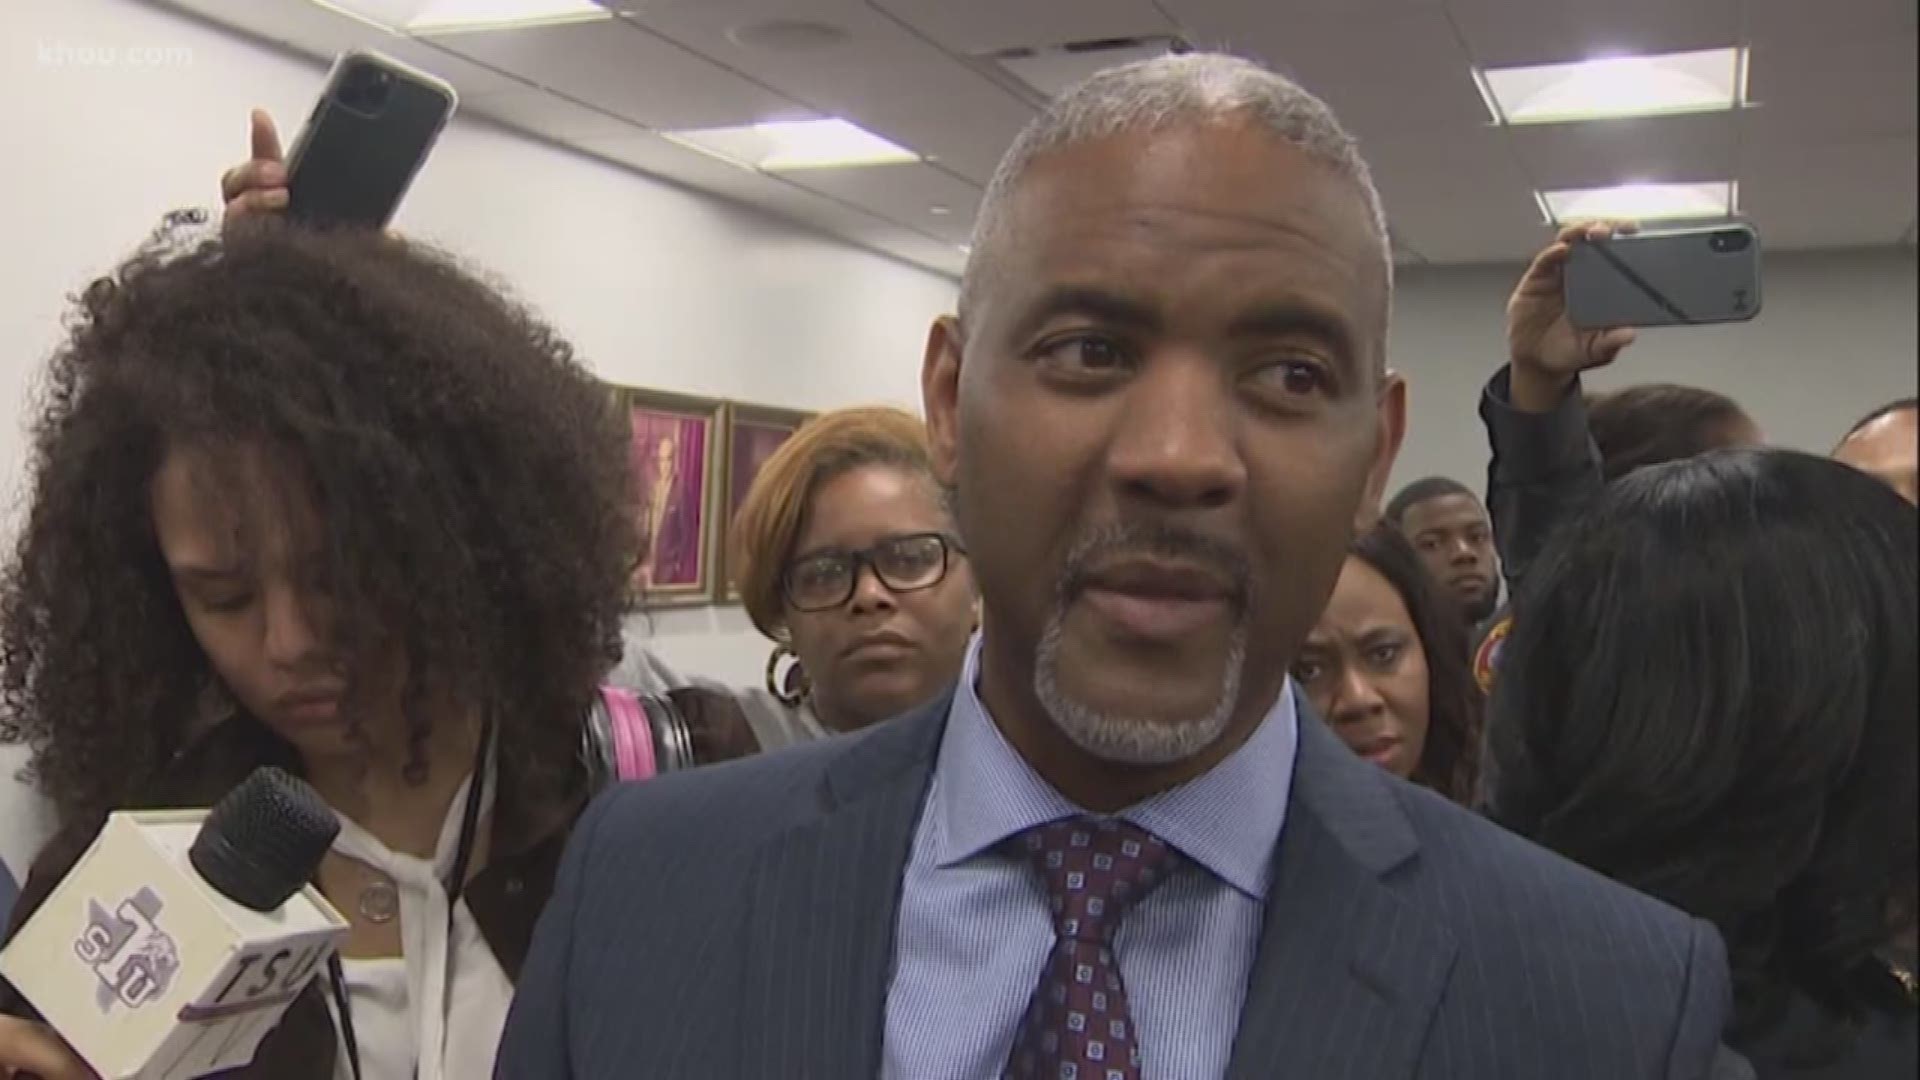 After a very heated and often contentious meeting at Texas Southern University, the Board of Regents voted to remove President Dr. Austin Lane late Tuesday night.